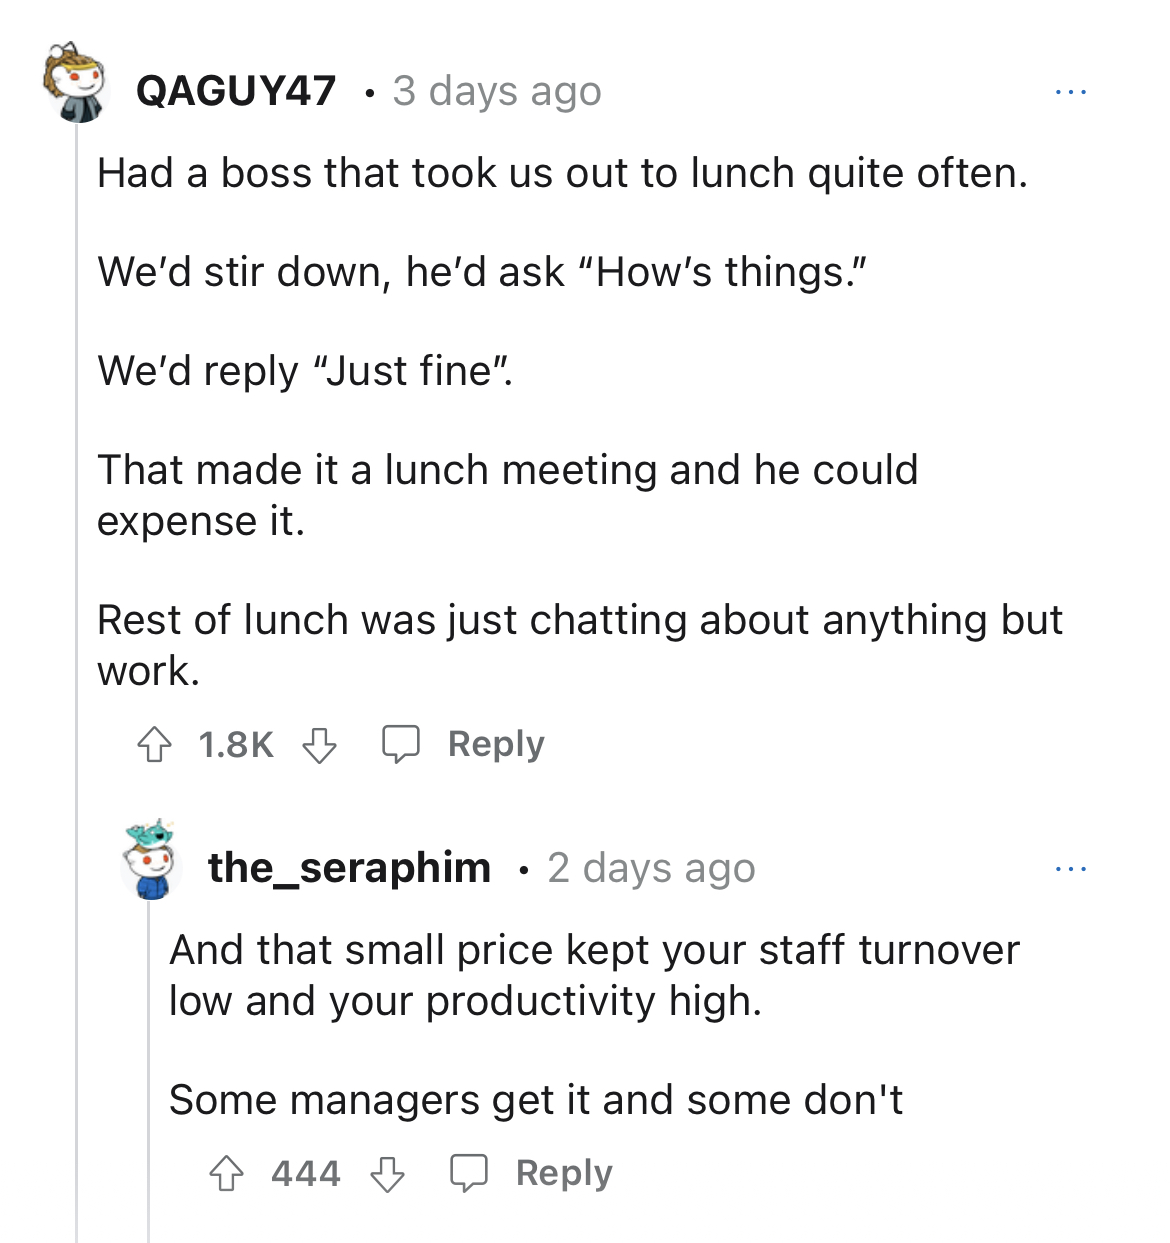 $15K expensed company dinner - angle - QAGUY47 3 days ago Had a boss that took us out to lunch quite often. We'd stir down, he'd ask "How's things." We'd "Just fine". That made it a lunch meeting and he could expense it. Rest of lunch was just chatting ab